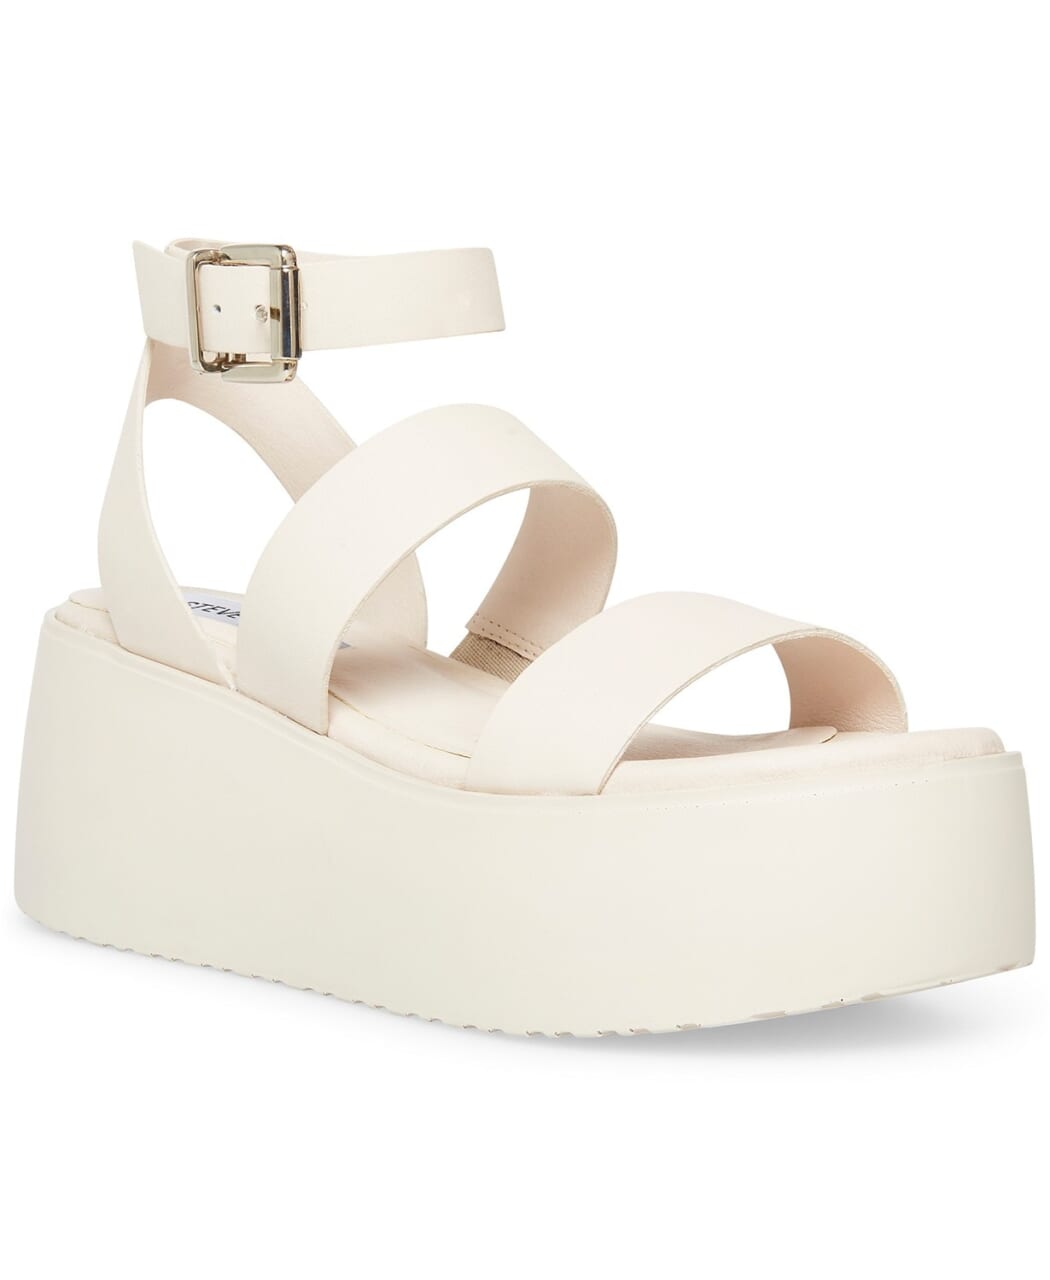 This Season's Hottest Sandal Trend Is All About Comfort